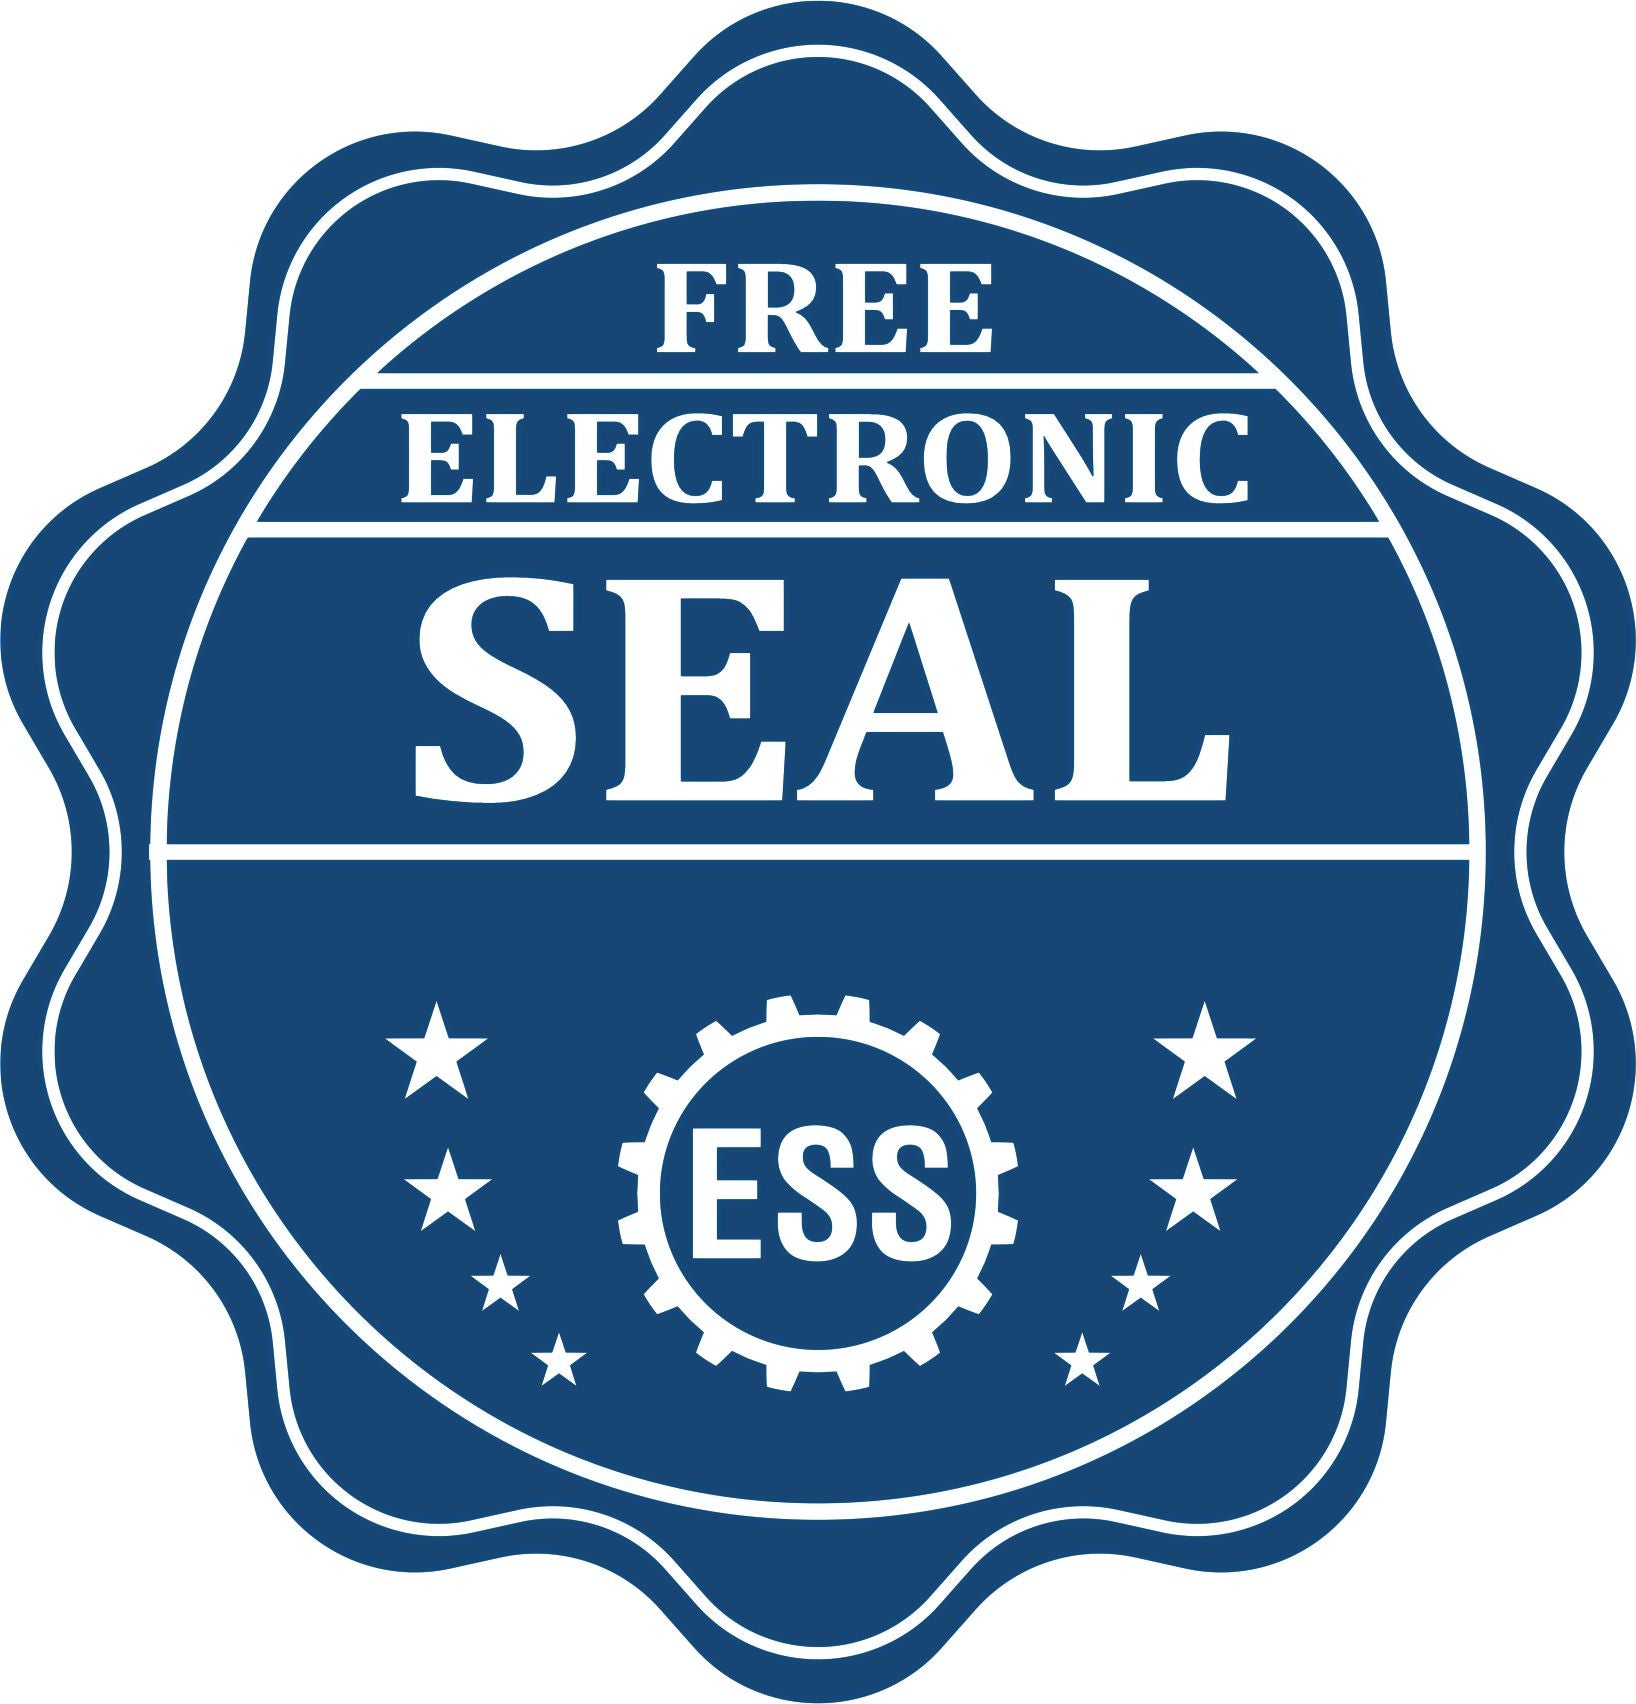 A badge showing a free electronic seal for the PSI Missouri Notary Stamp with stars and the ESS gear on the emblem.